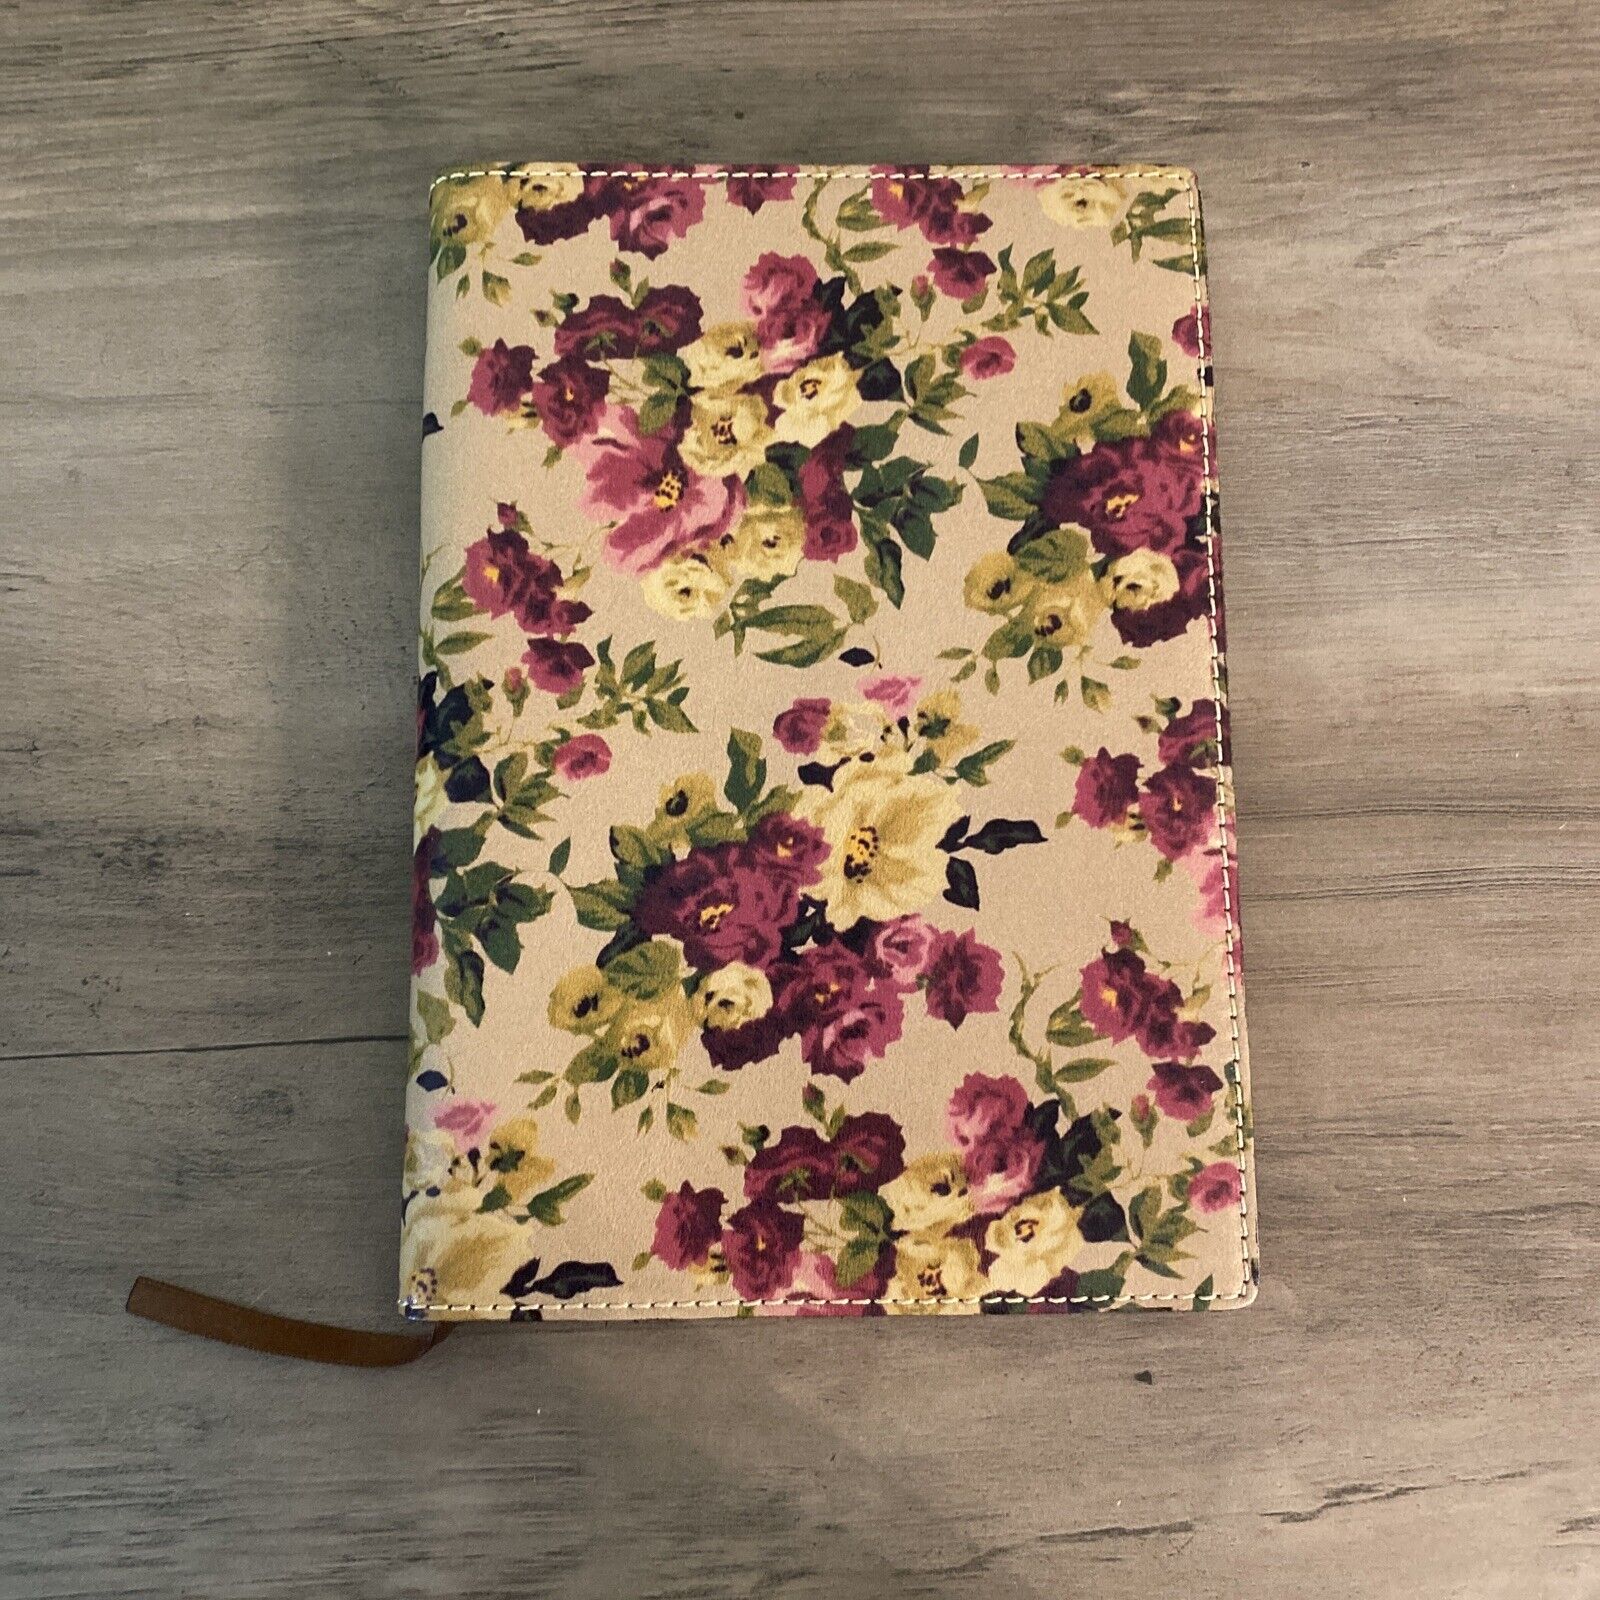 Patricia Nash Leather Journal Cover Vintage Floral Print 9x6